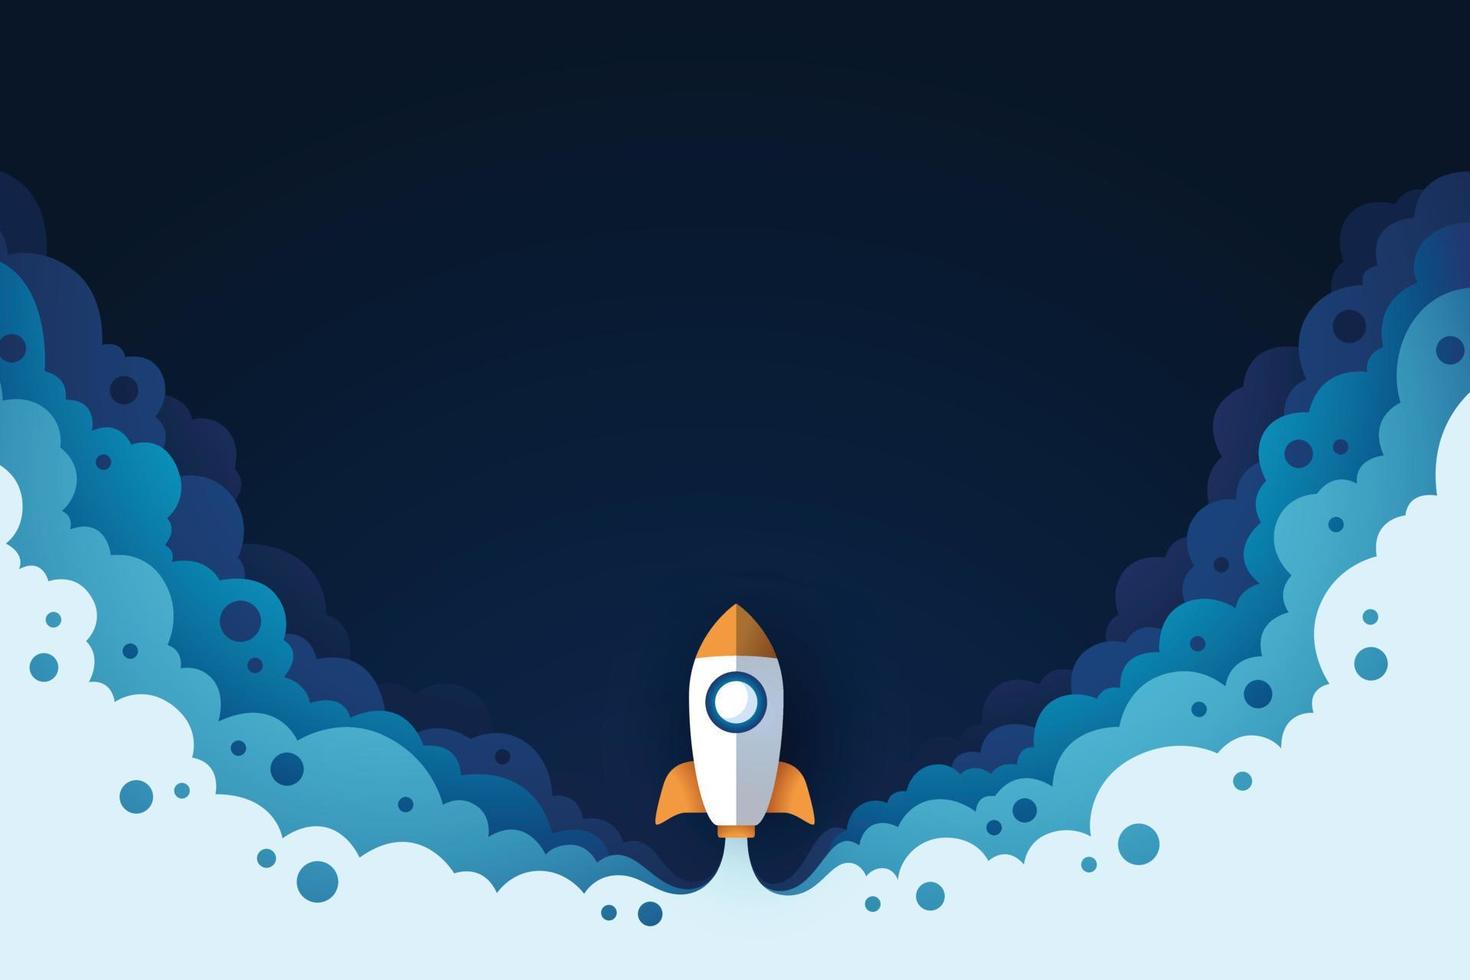 Rocket launch background with paper cut shape vector